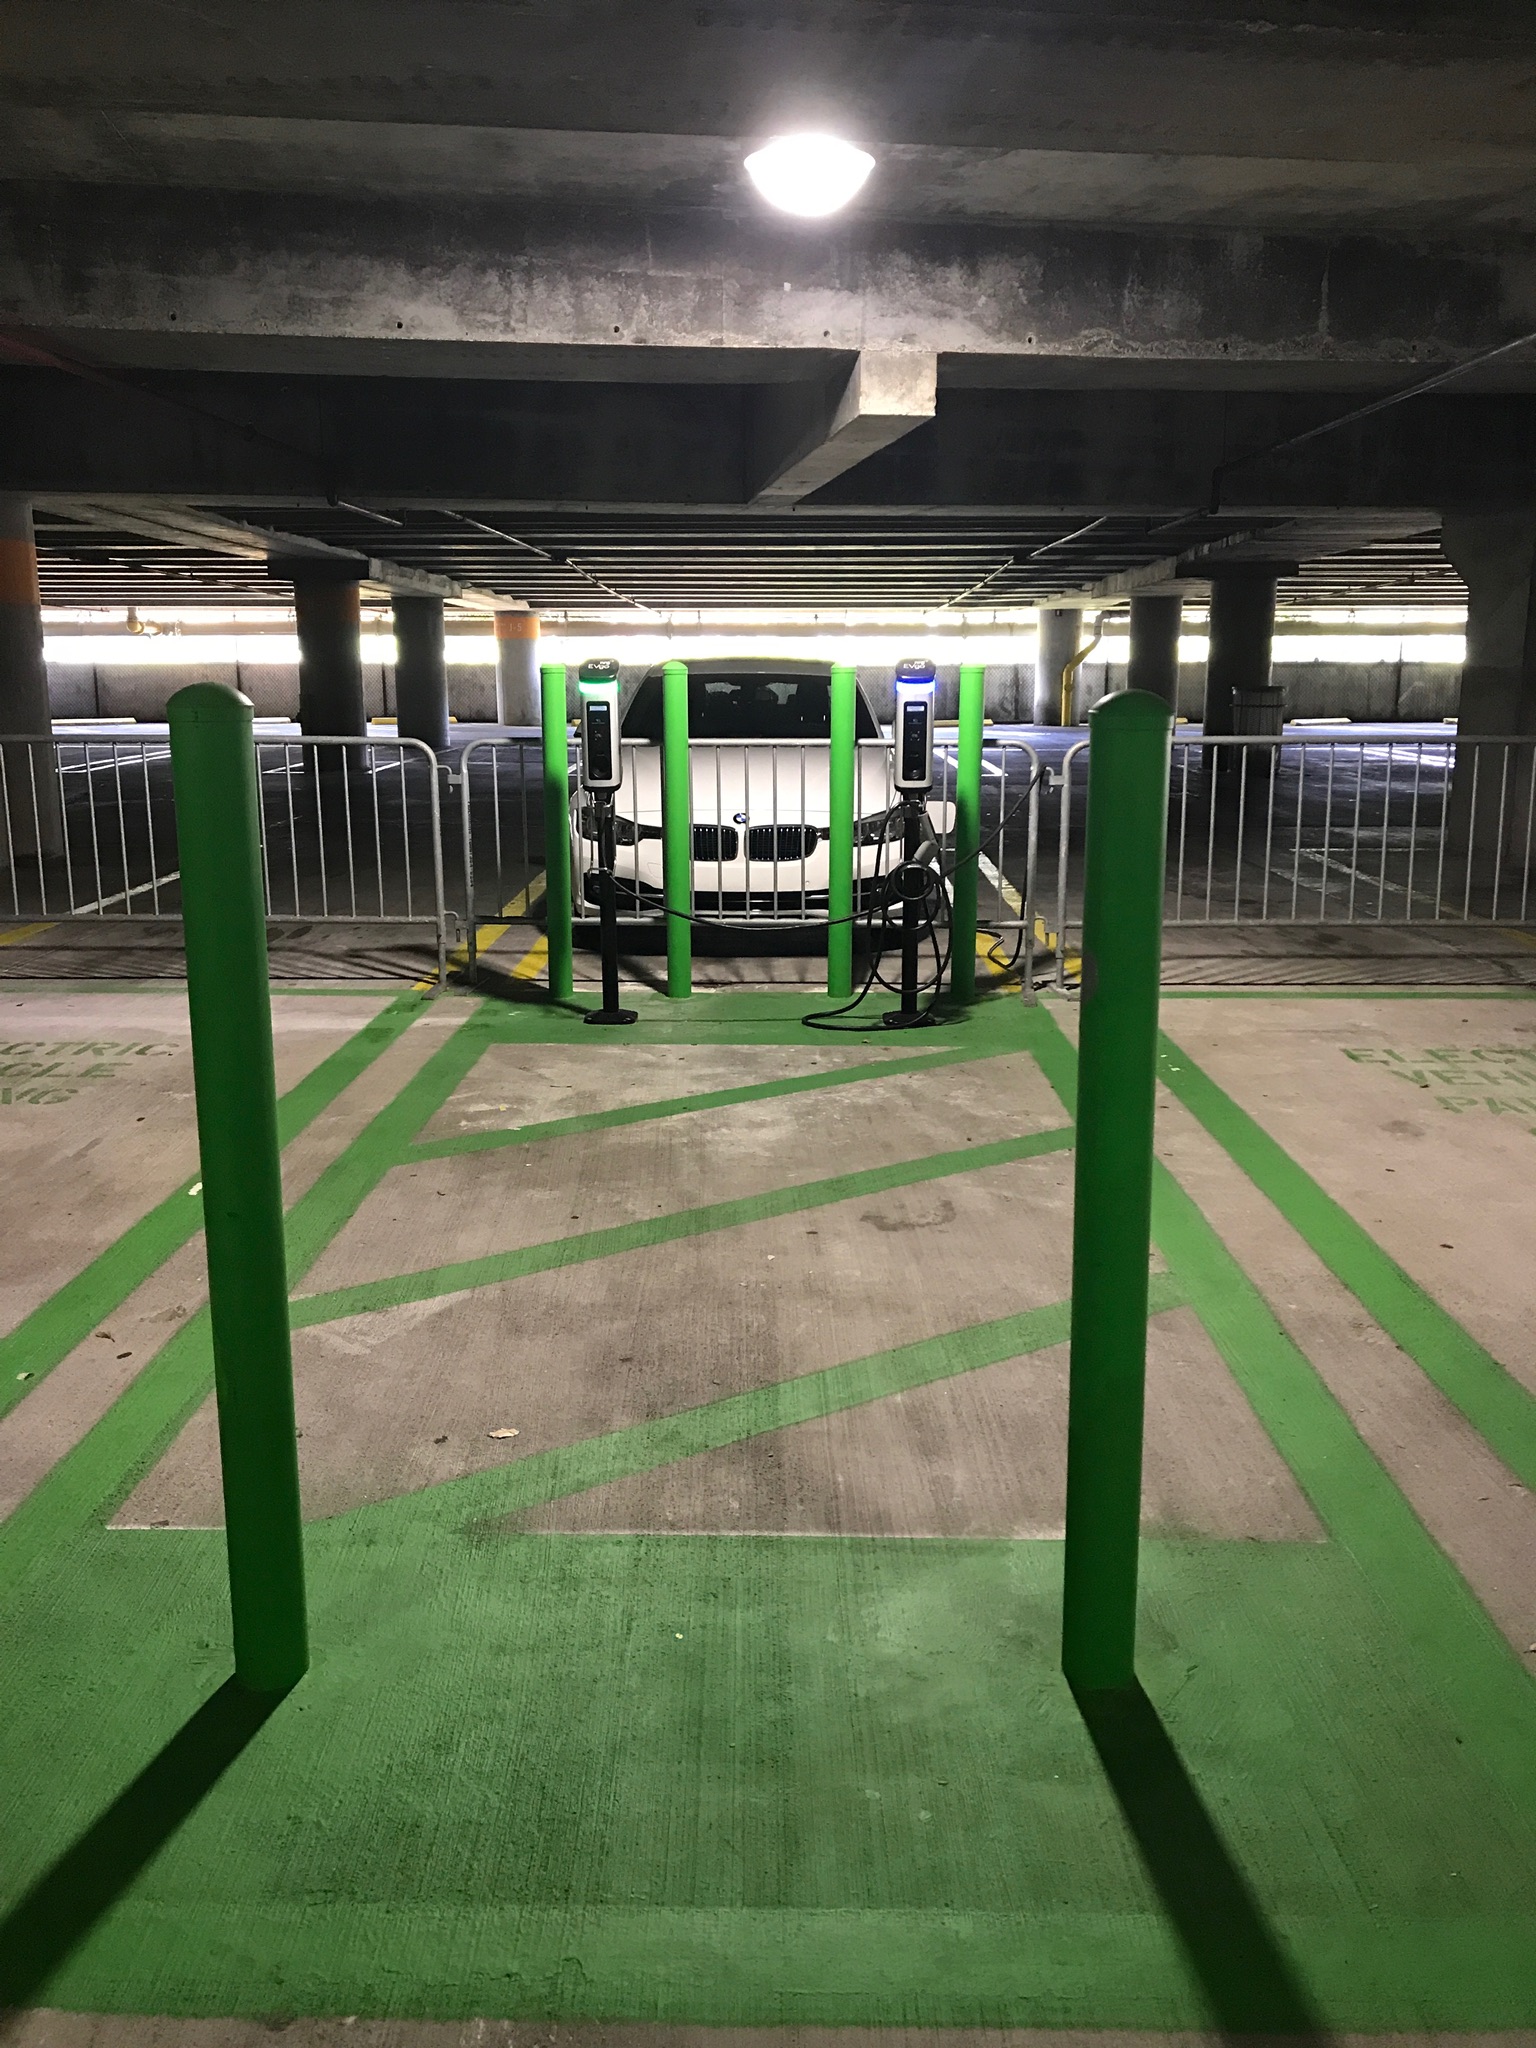 American Airlines Arena Electric Car Charging